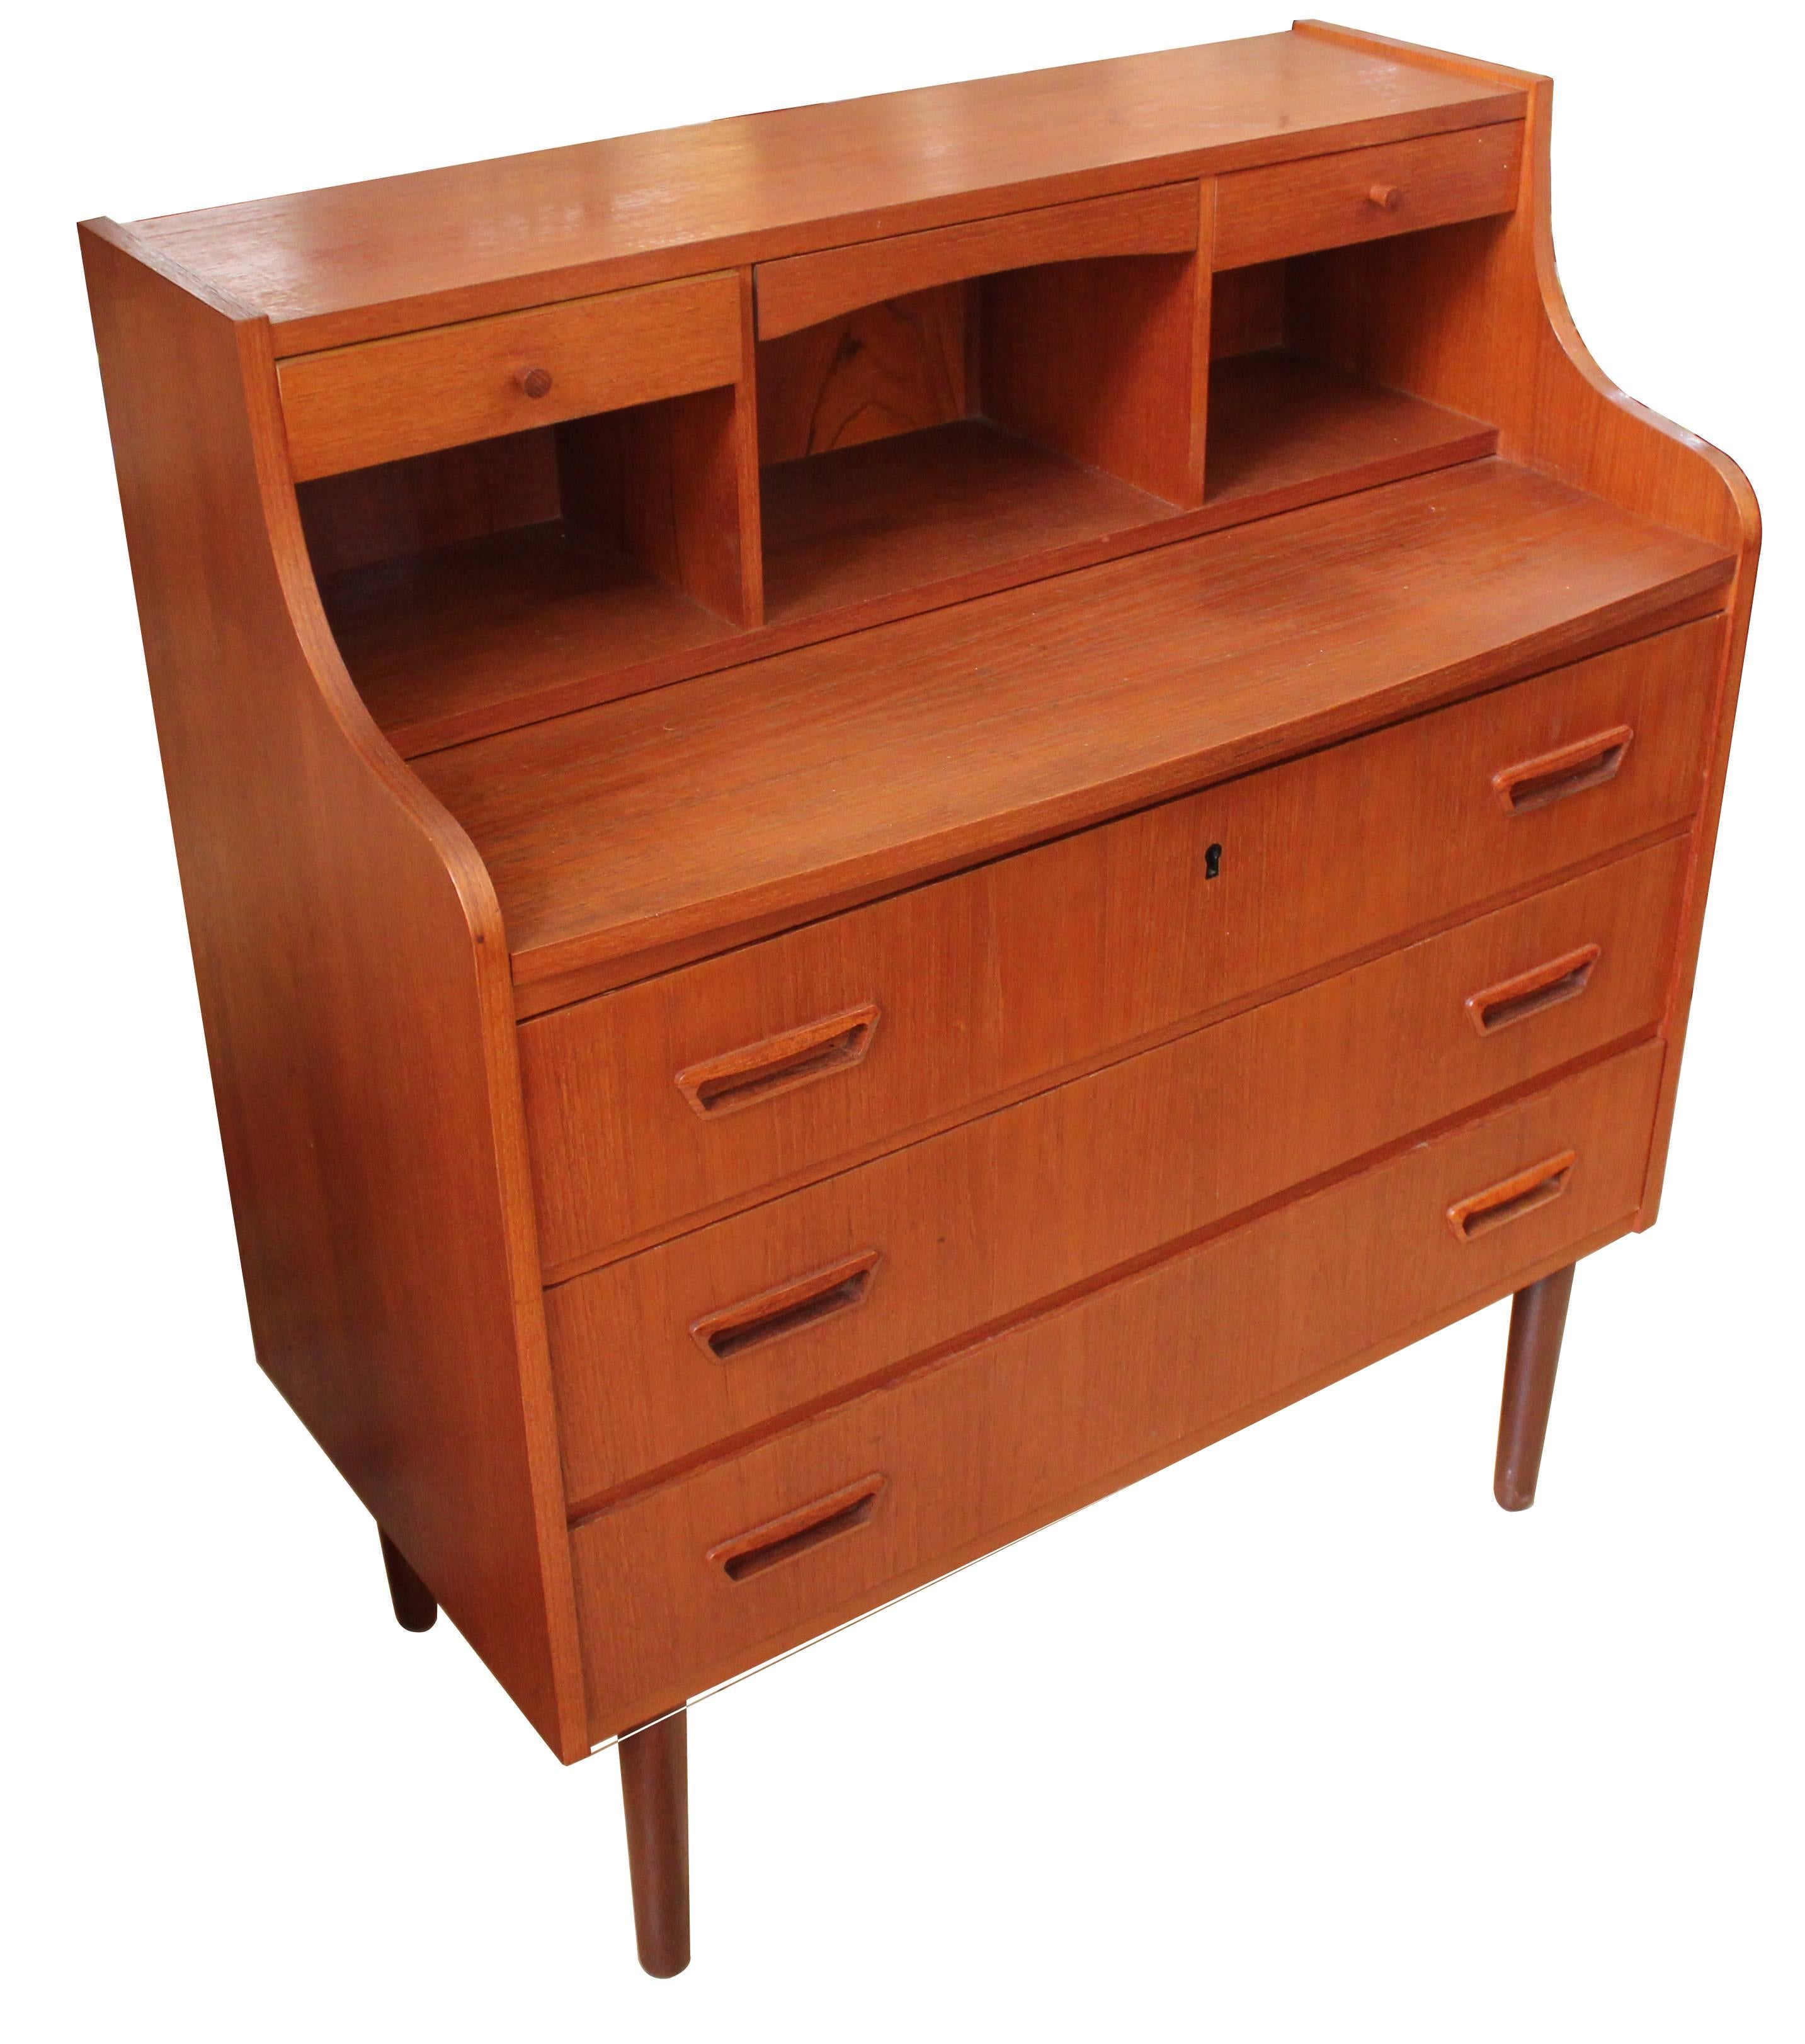 1950s Danish modern teak secretary desk with fold-down mirror and extendable desk top. The desk has three lower drawers and two small organizing drawers in the upper portion. At full extension, the desk top provides 16